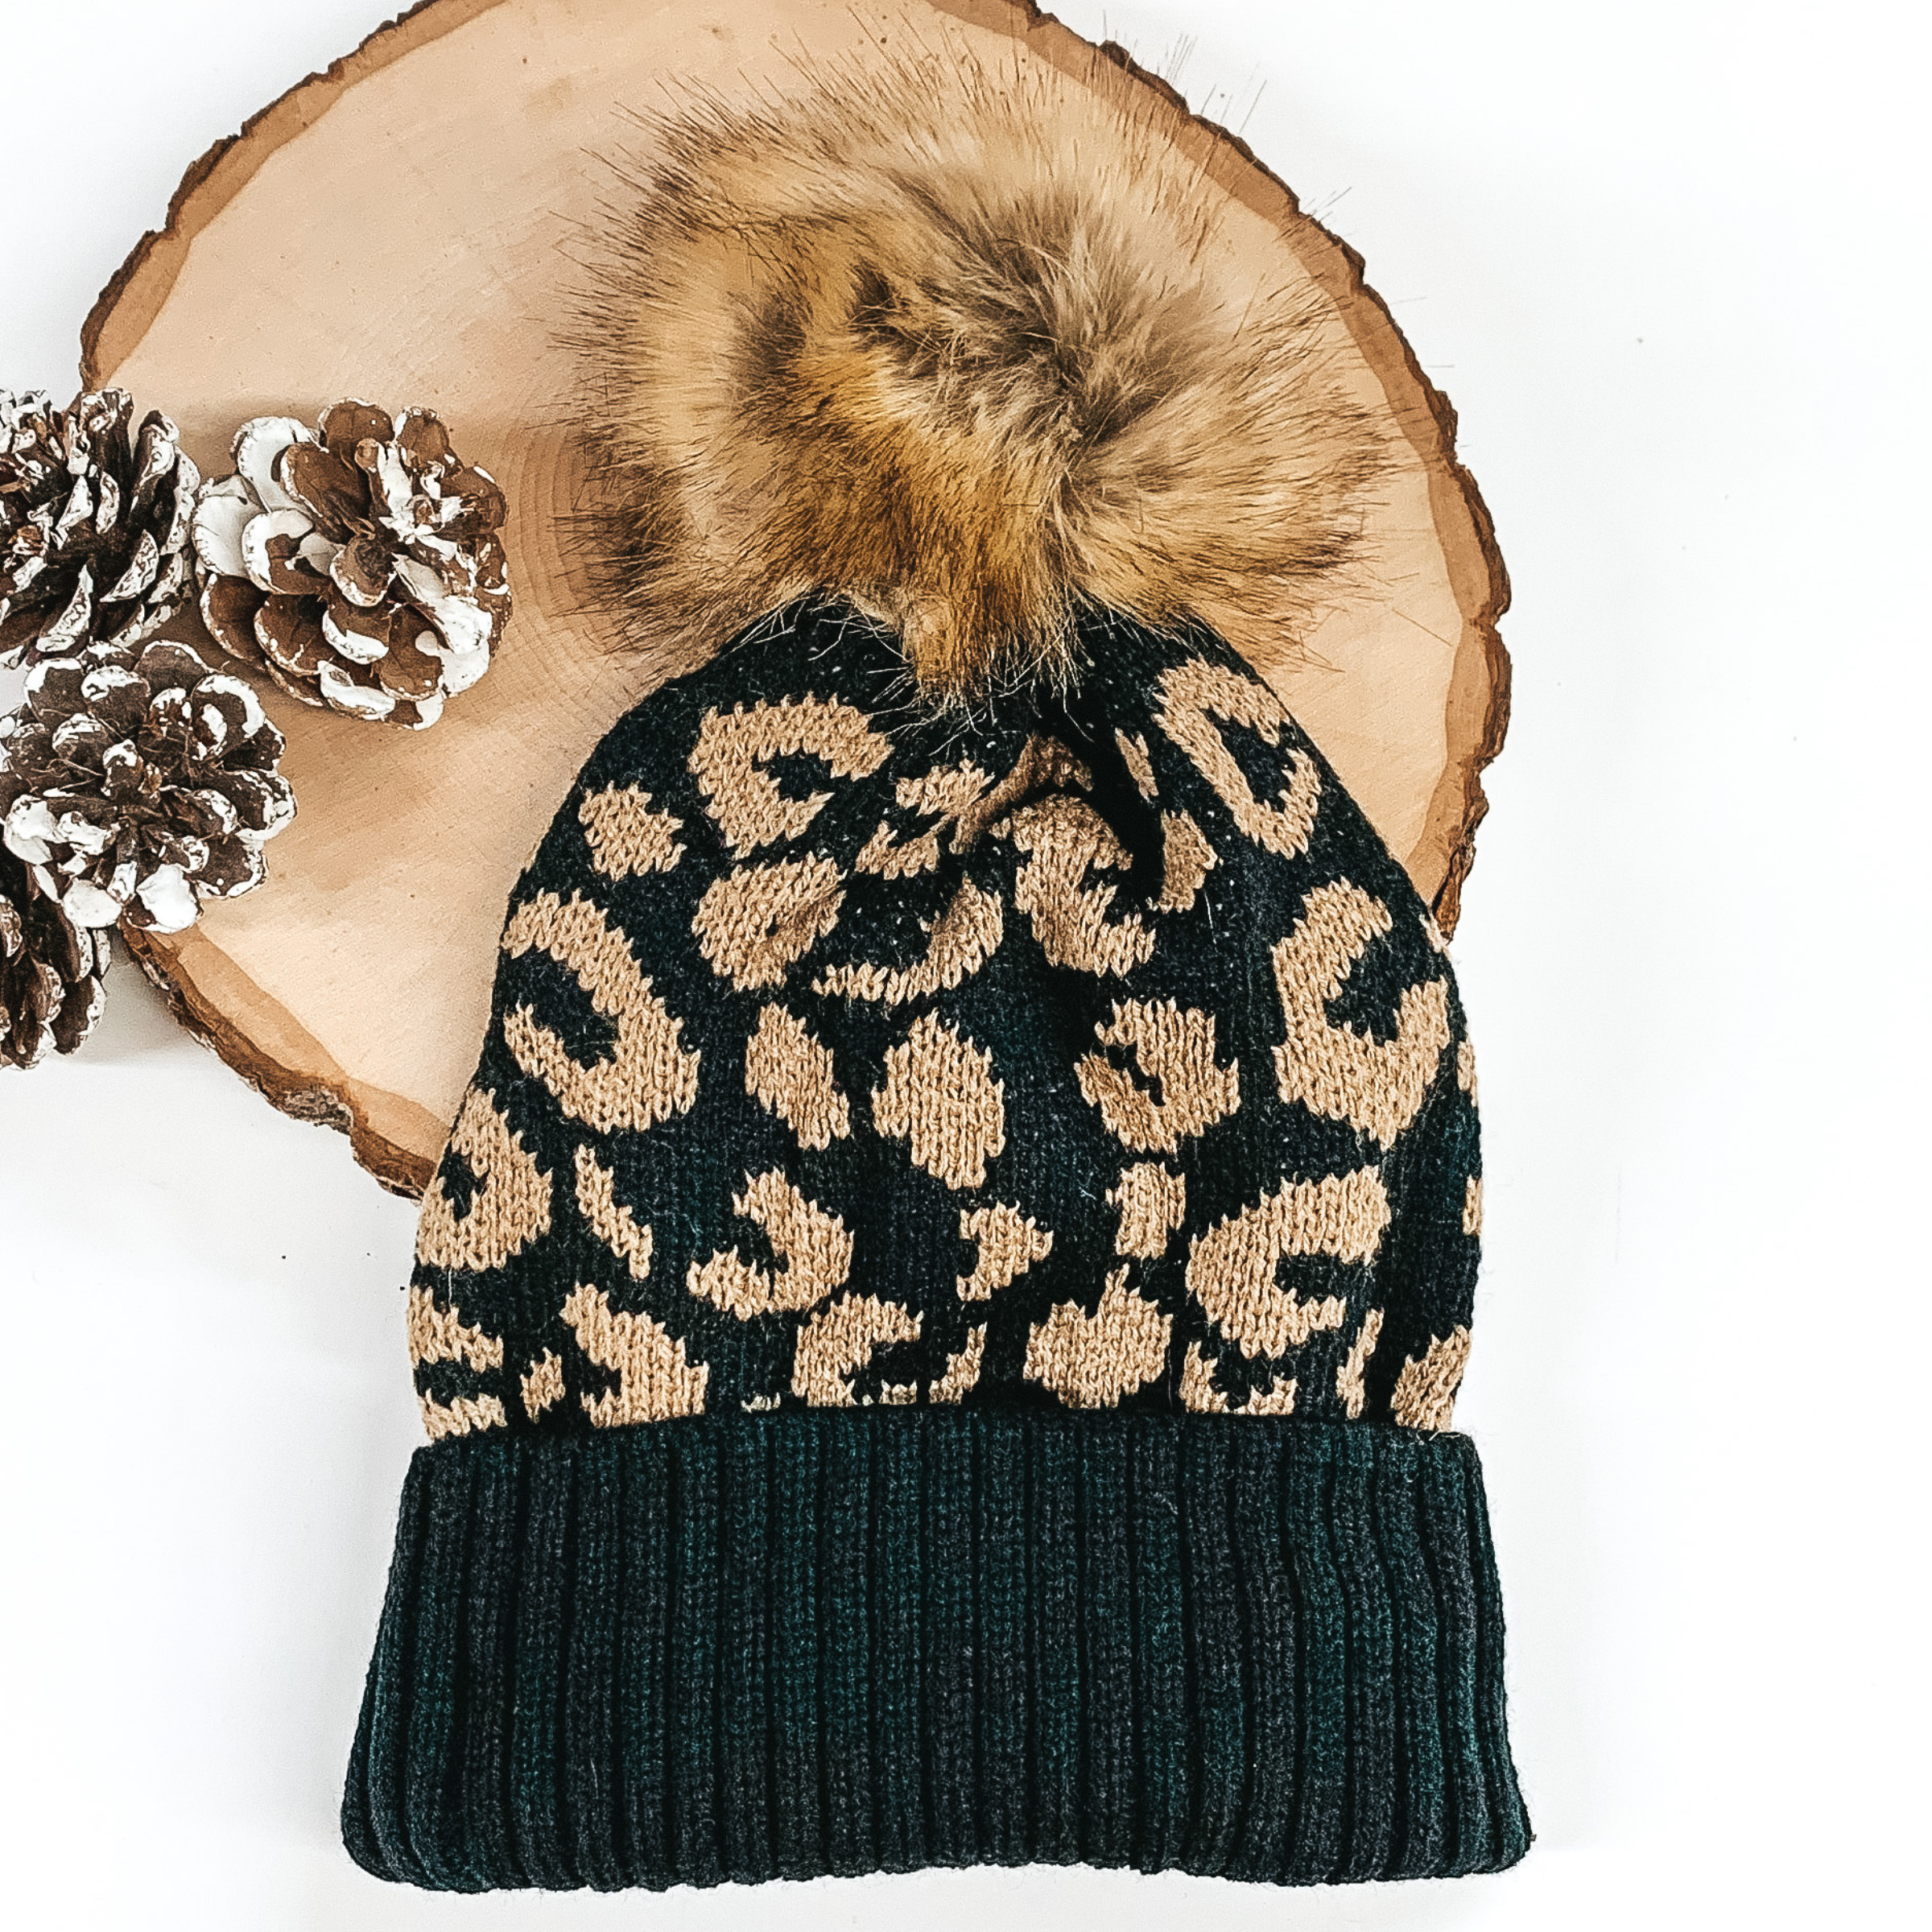 Black beanie with tan leopard print and tan pom pom at the top. This beanie is pictured laying on a piece of wood on a white background.